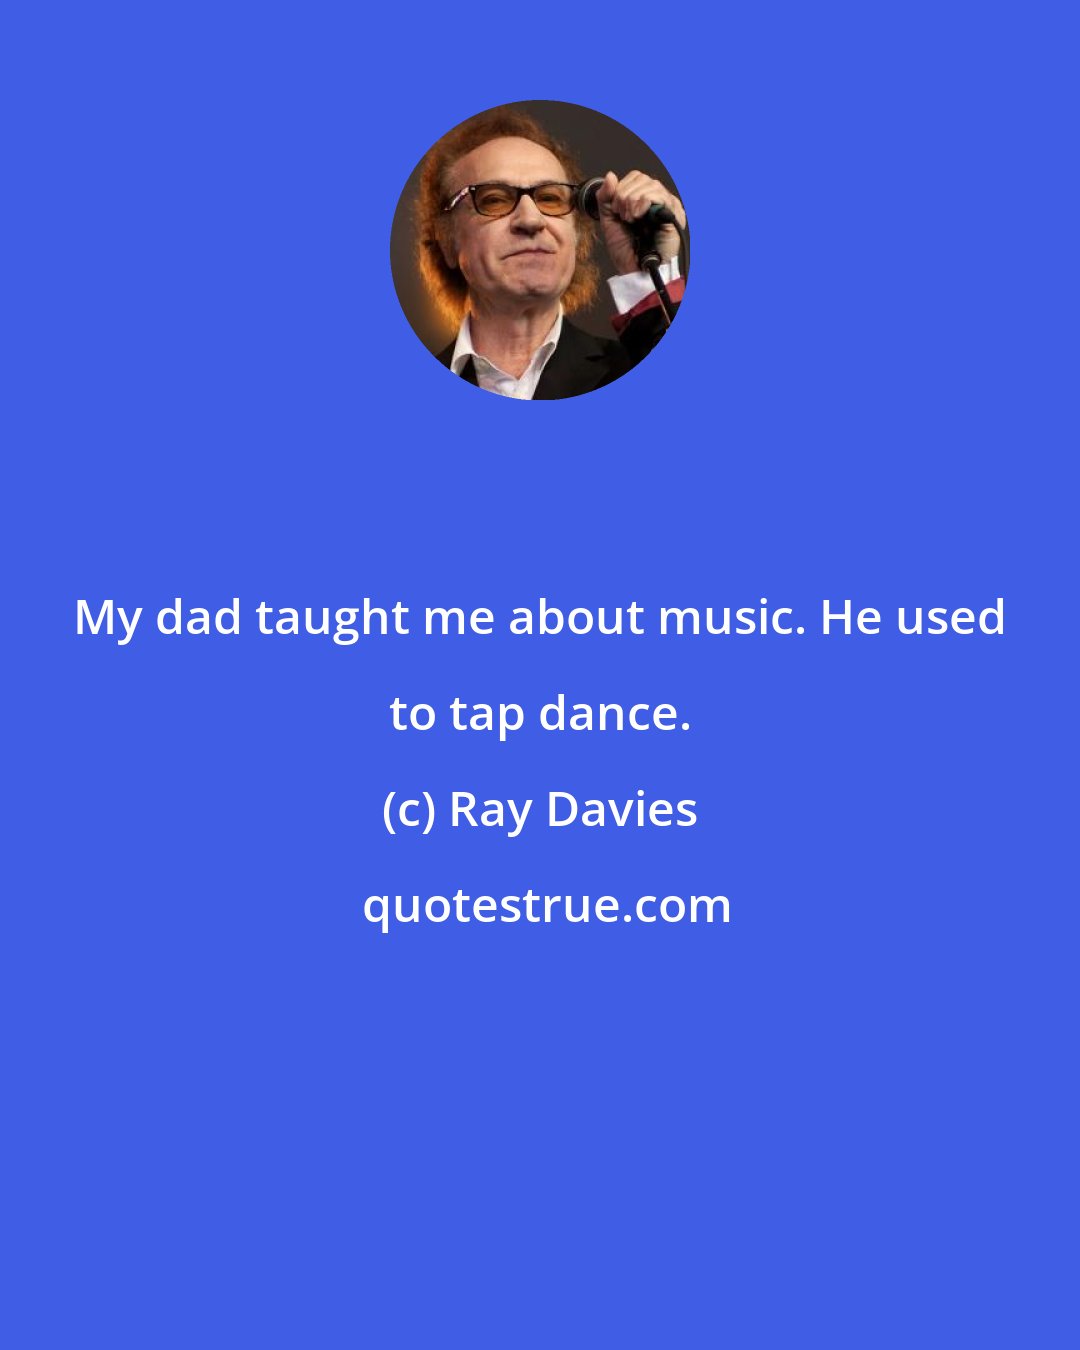 Ray Davies: My dad taught me about music. He used to tap dance.